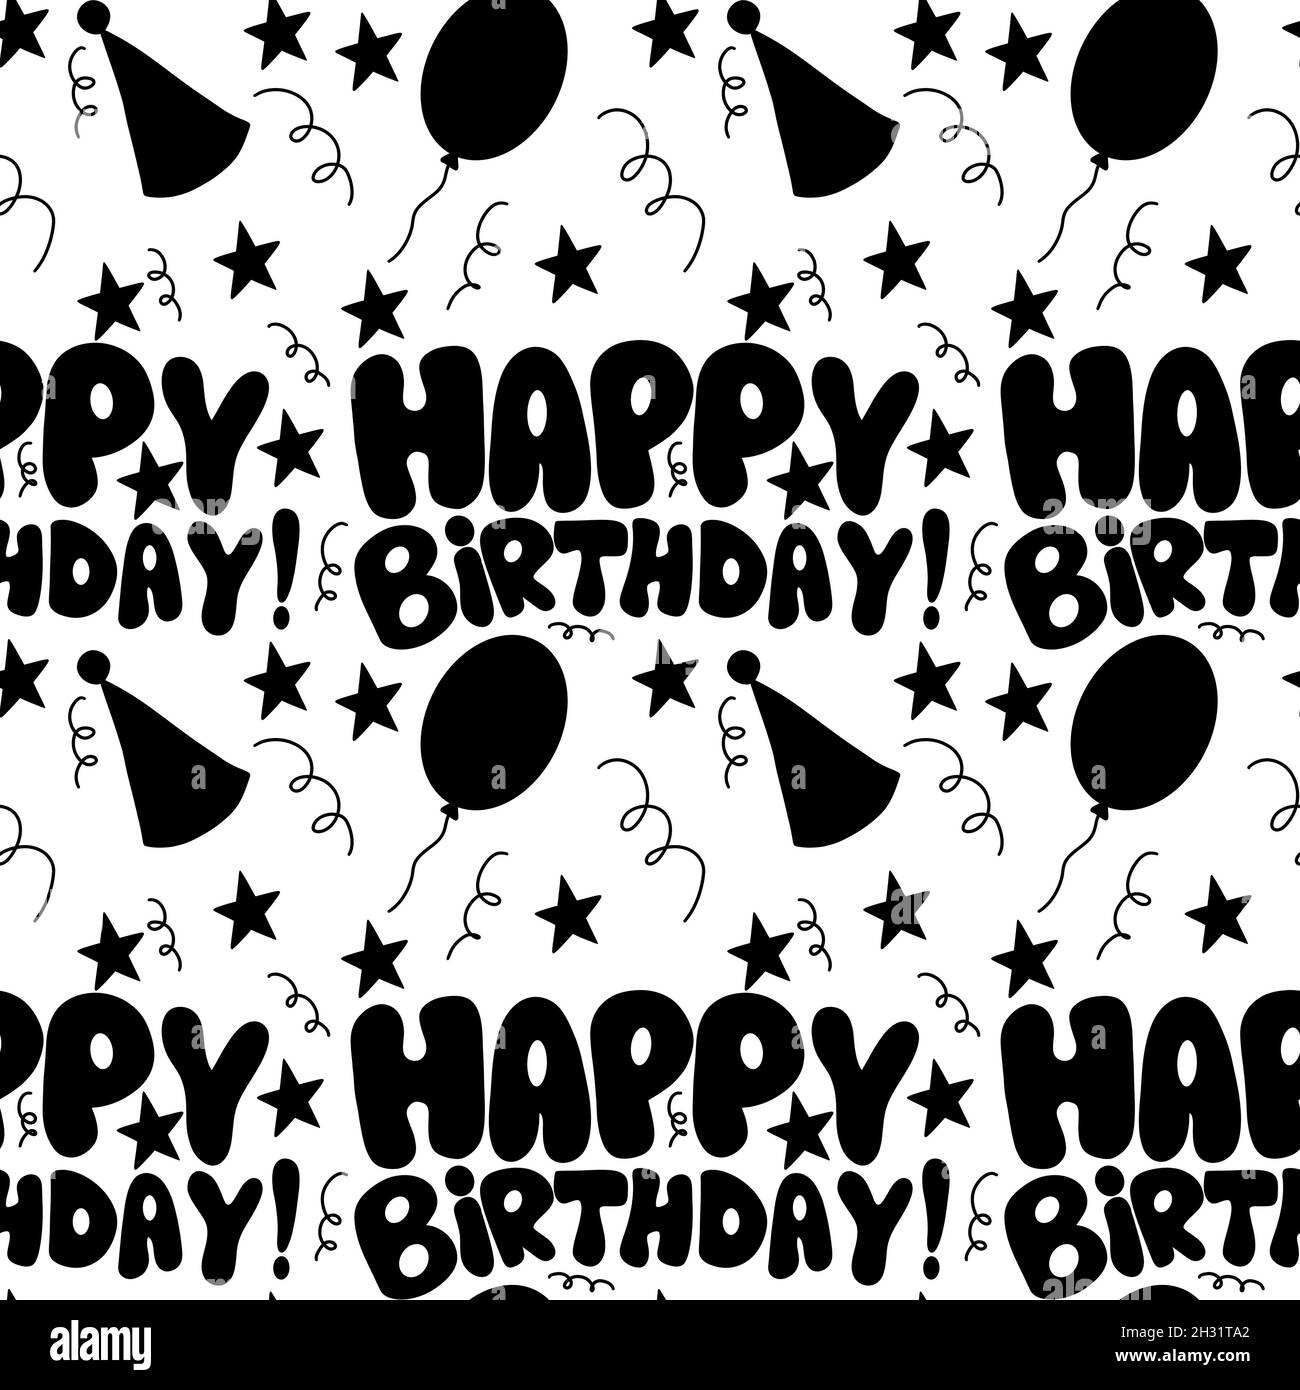 Seamless birthday pattern with balloons on white background  Stock Photo